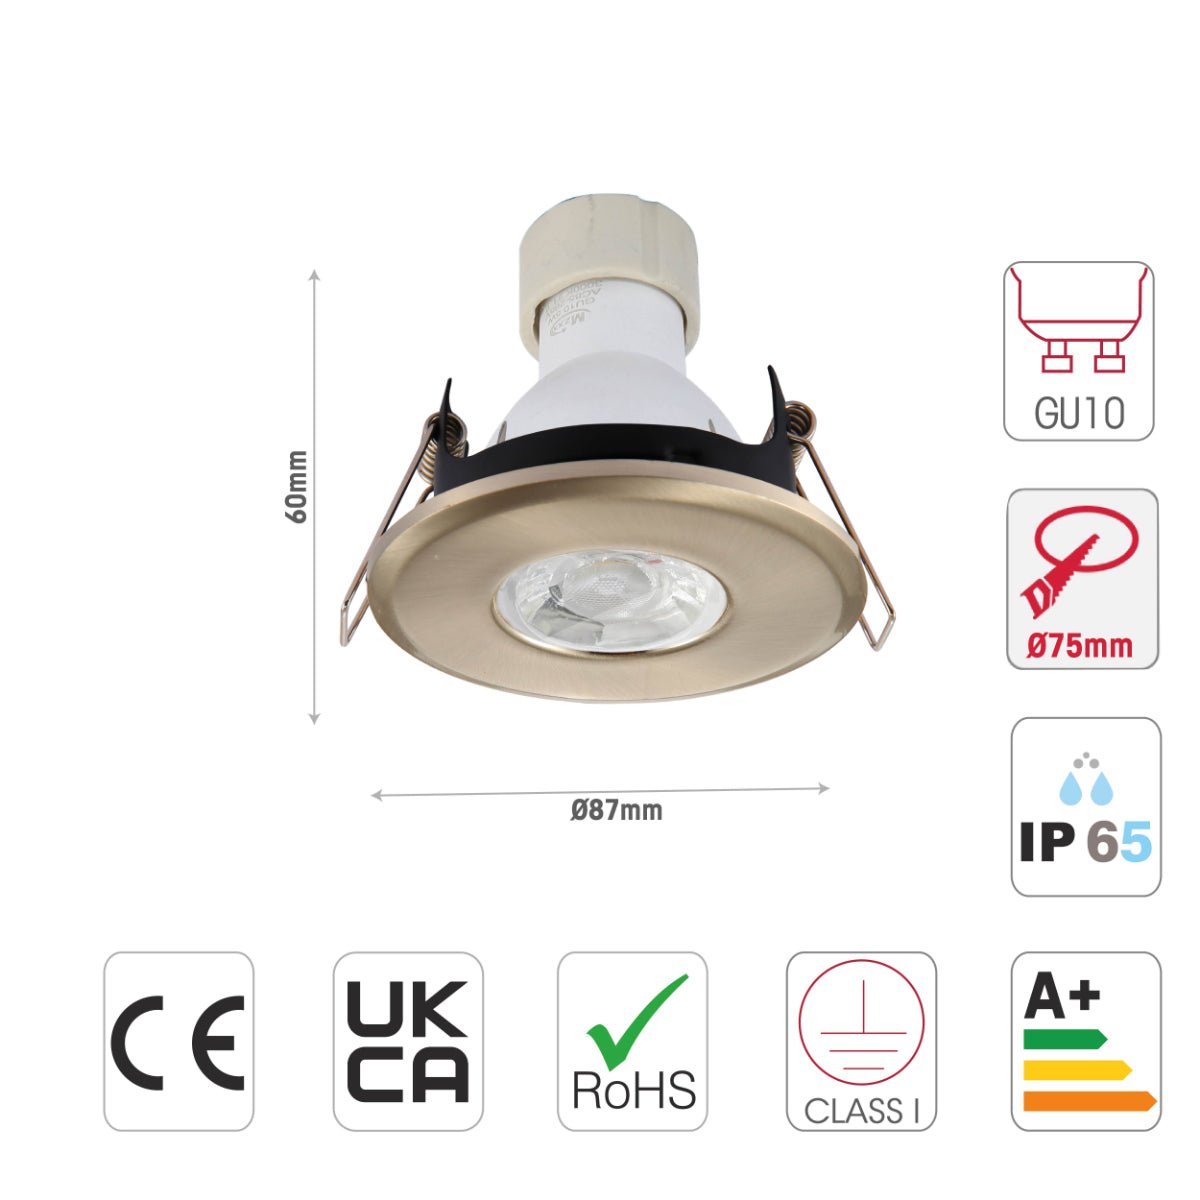 Size and specs of IP65 Fixed Diecasting Downlight With GU10 Terminal Bracket And Junction Box Chrome | TEKLED 143-03732